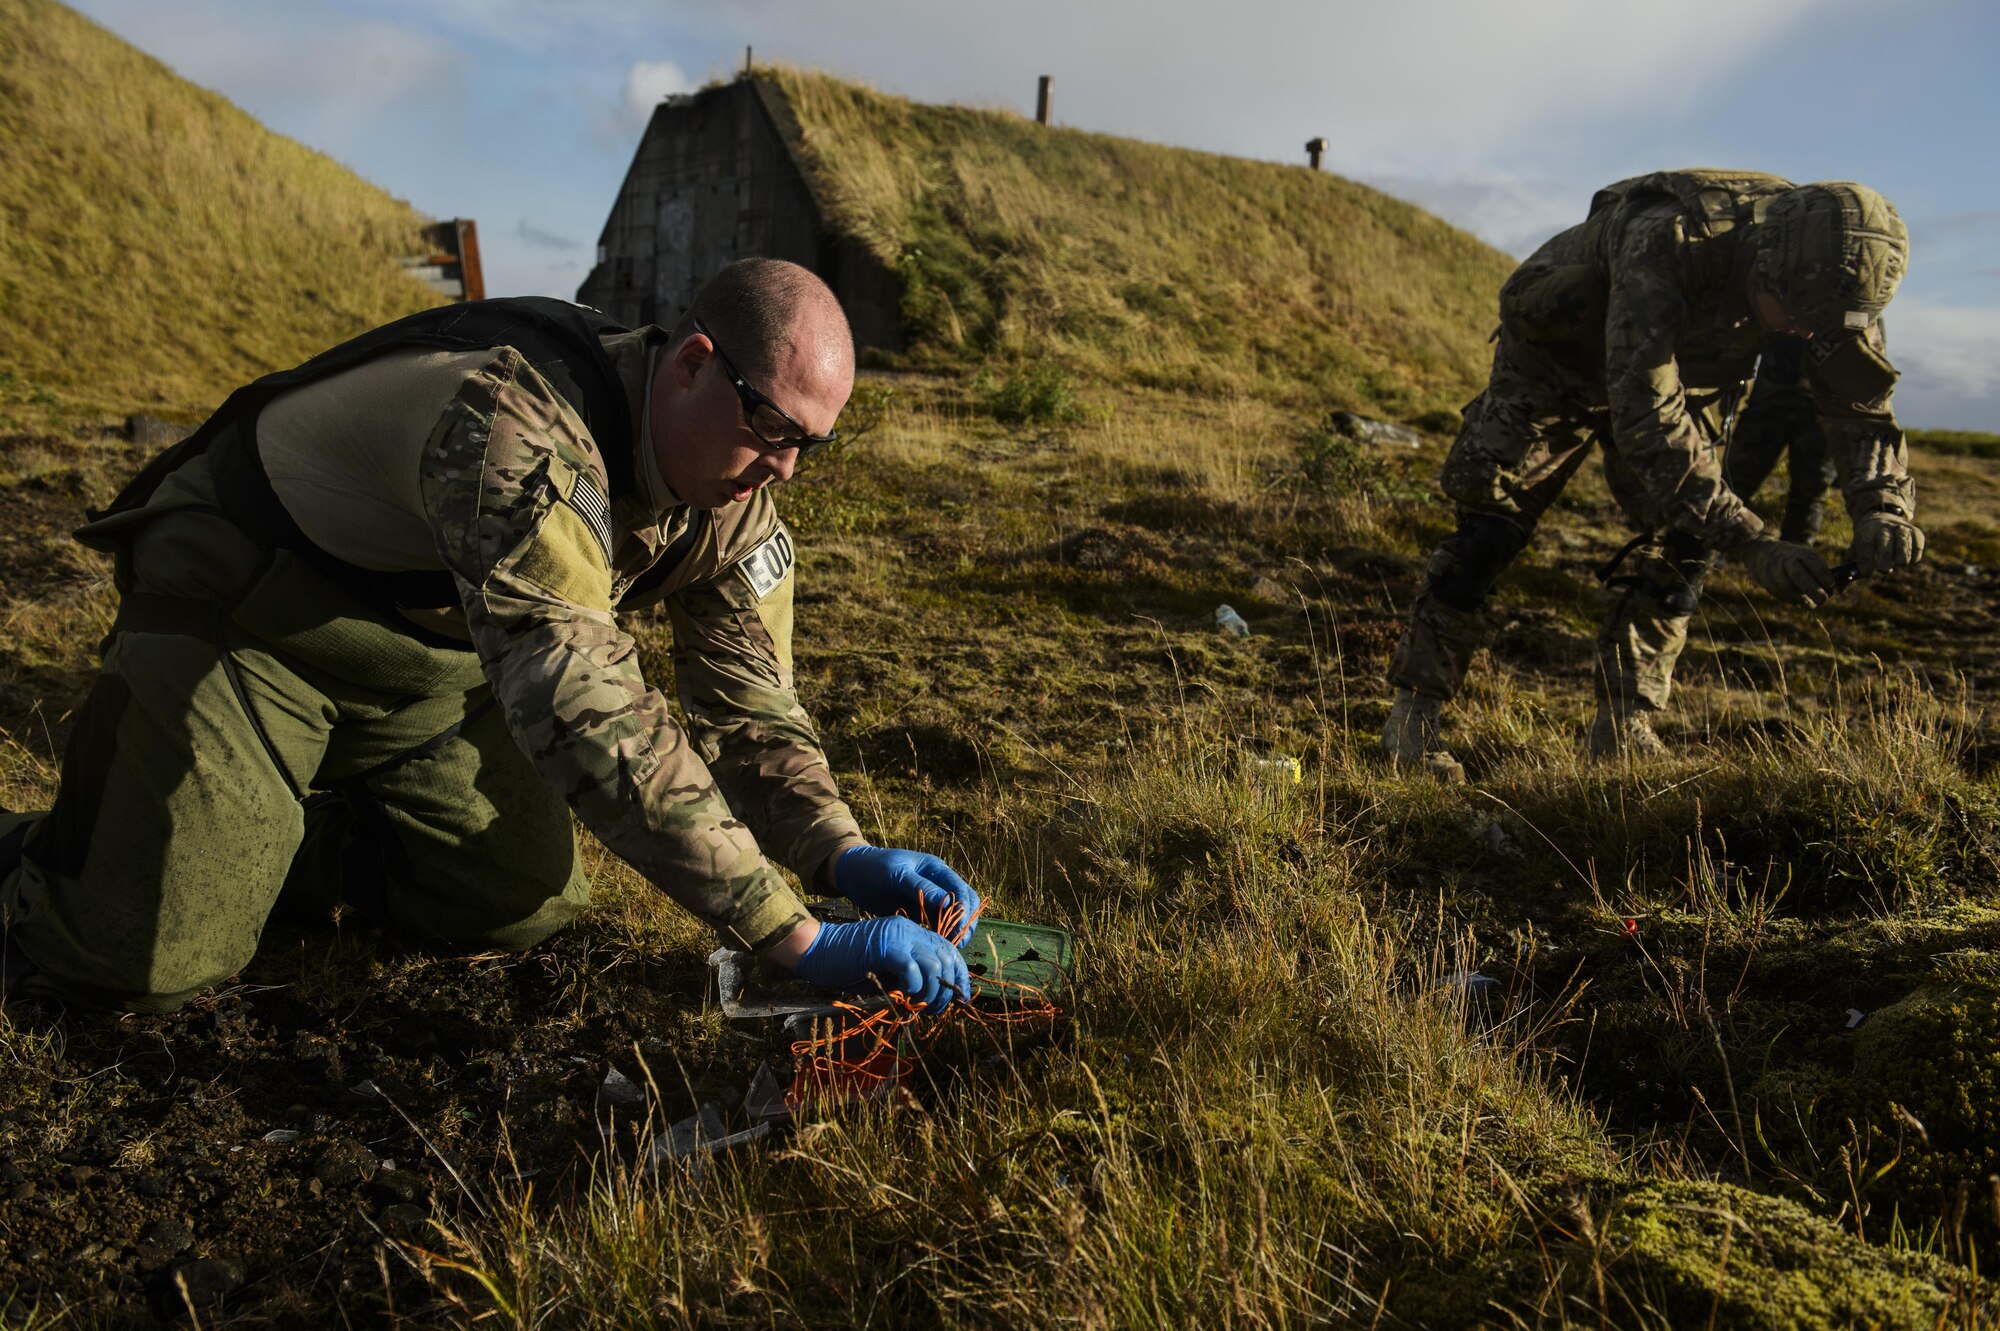 U.S. Air Force Tech. Sgt. Jason Umlauf, left, and Senior Airman Kyle Koski, 52nd Civil Engineer Squadron explosive ordnance disposal, Spangdahlem Air Base, Germany, collect evidence from a detonated improvised explosive devices during Northern Challenge 16 exercise at Icelandic Coast Guard Keflavik Facility, Iceland, Sept. 19, 2016. The exercise focused on disabling improvised explosive devices in support of counter-terrorism tactics to prepare Partnership for Peace, NATO, and Nordic nations for international deployments and defense against terrorism. (U.S. Air Force photo by Staff Sgt. Jonathan Snyder)